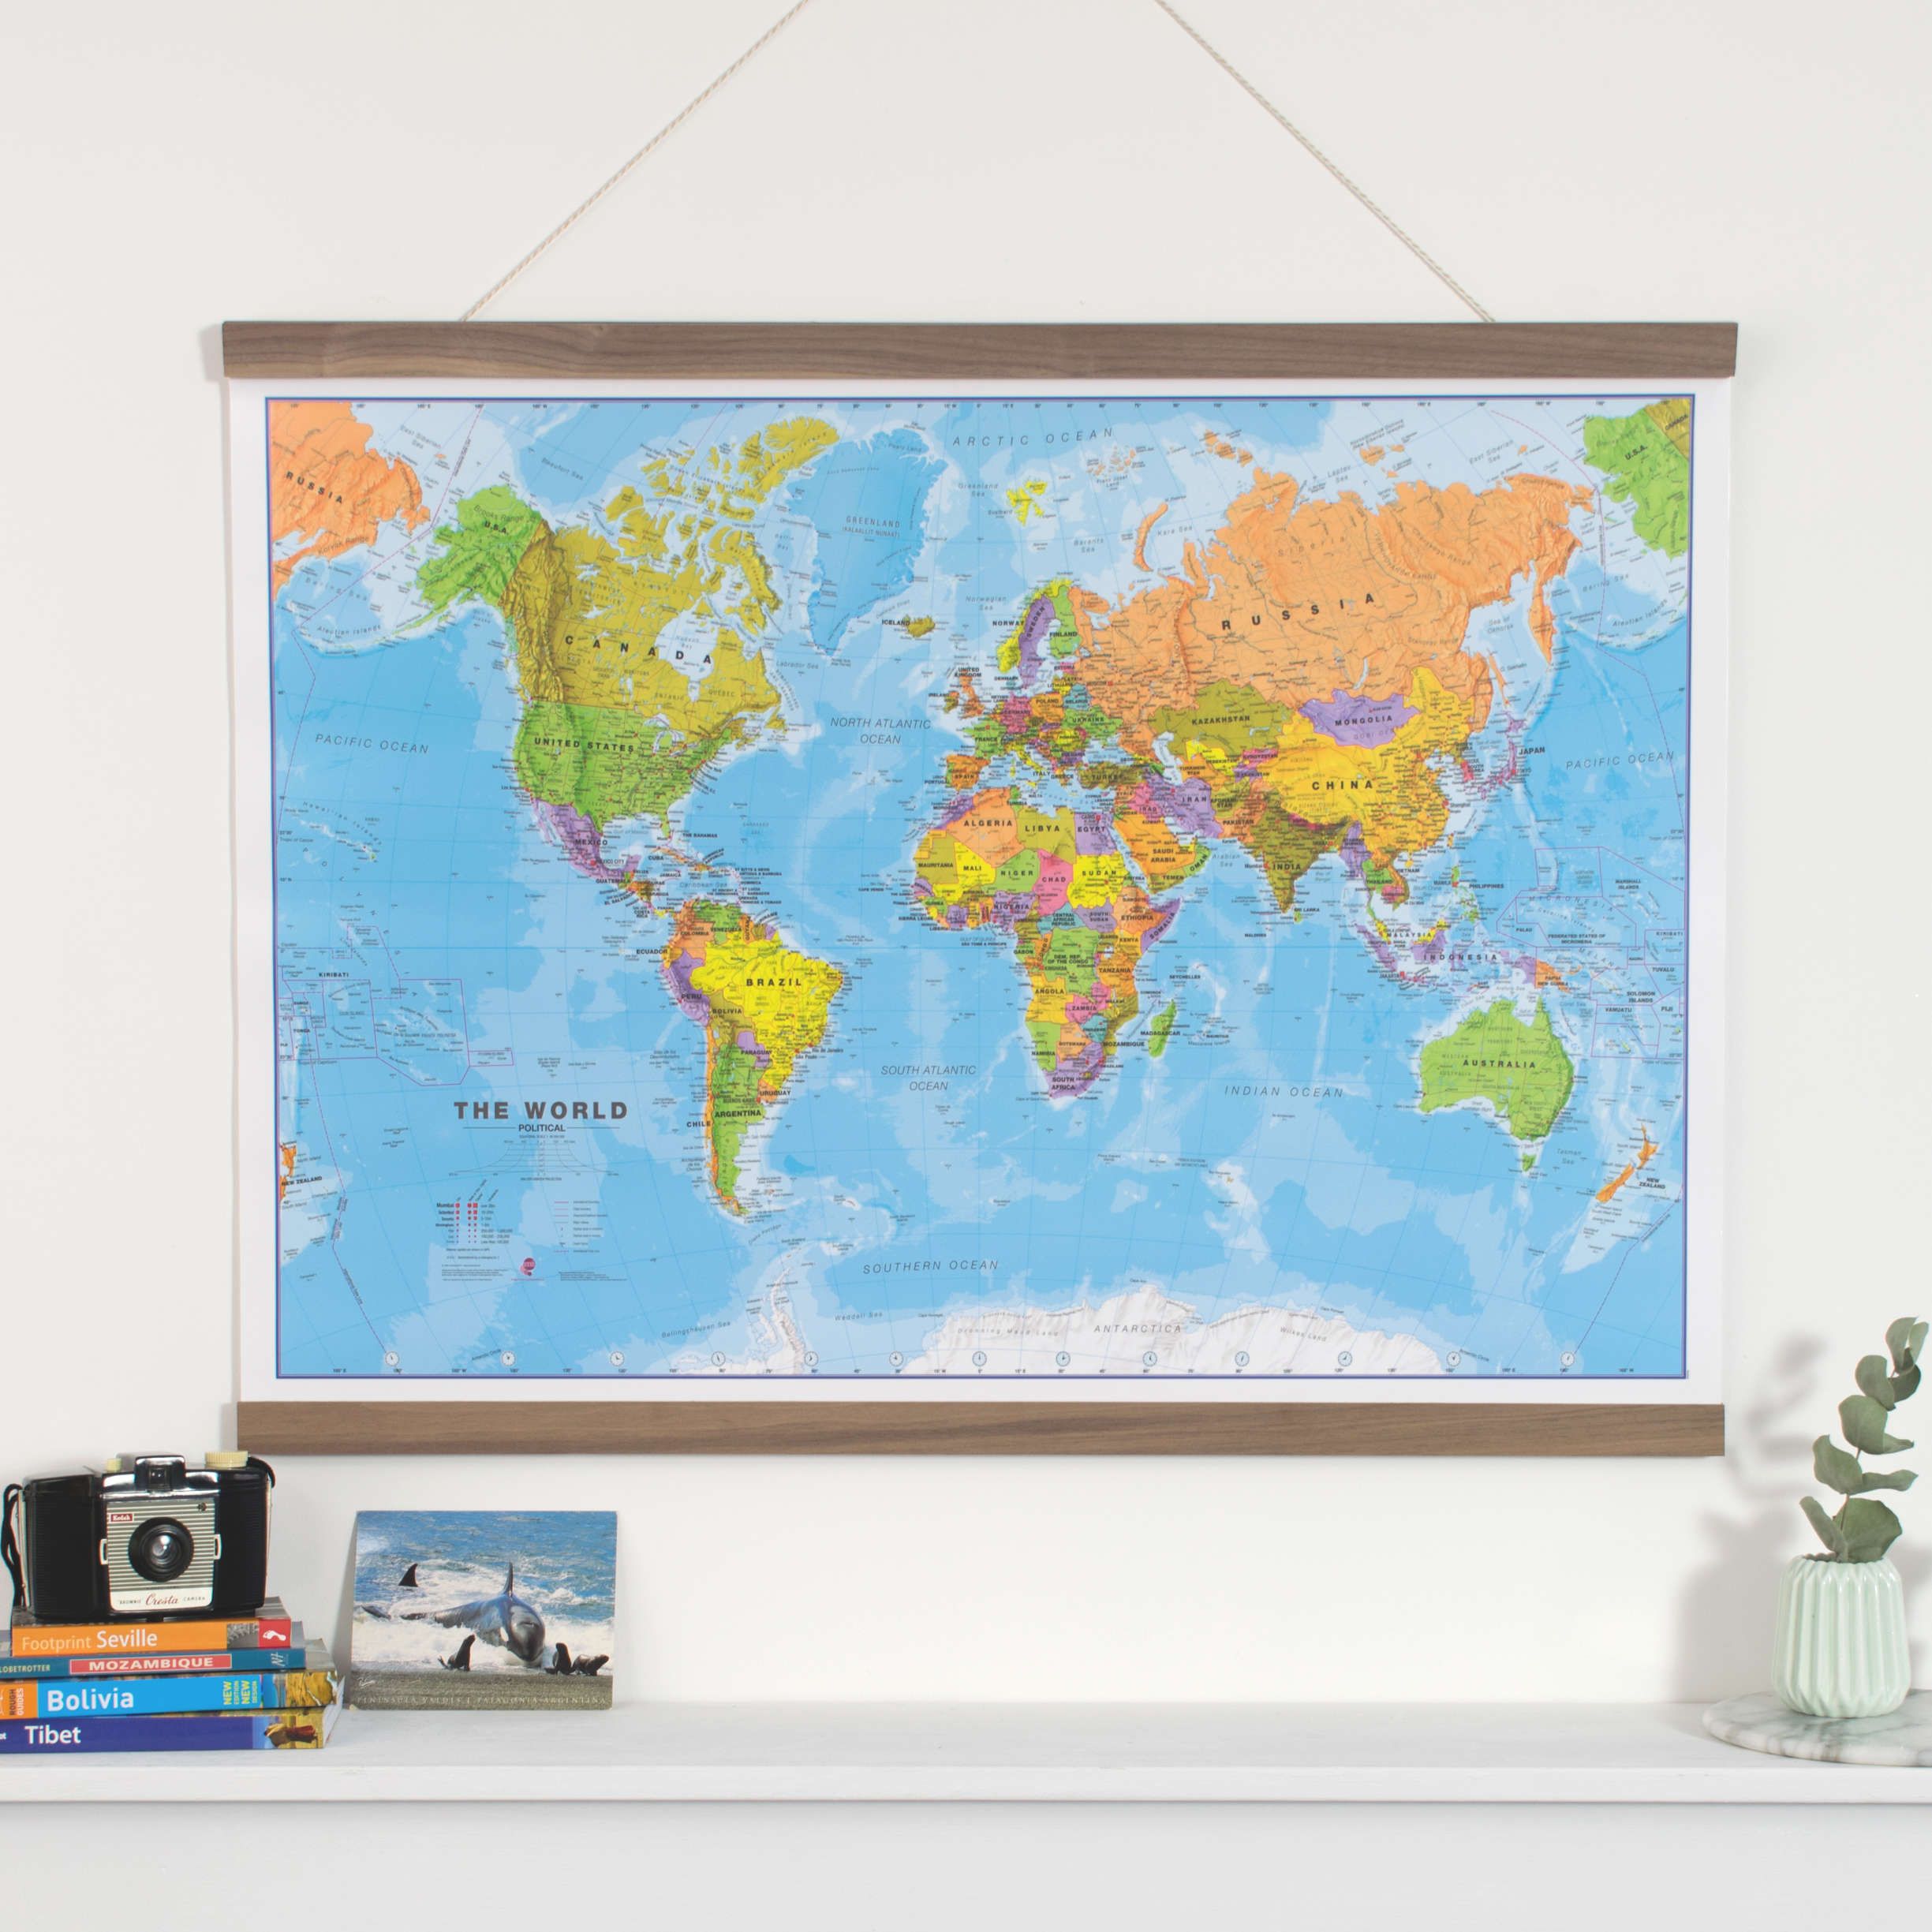 large map of the world for wall Large World Political Map World Wall Map large map of the world for wall